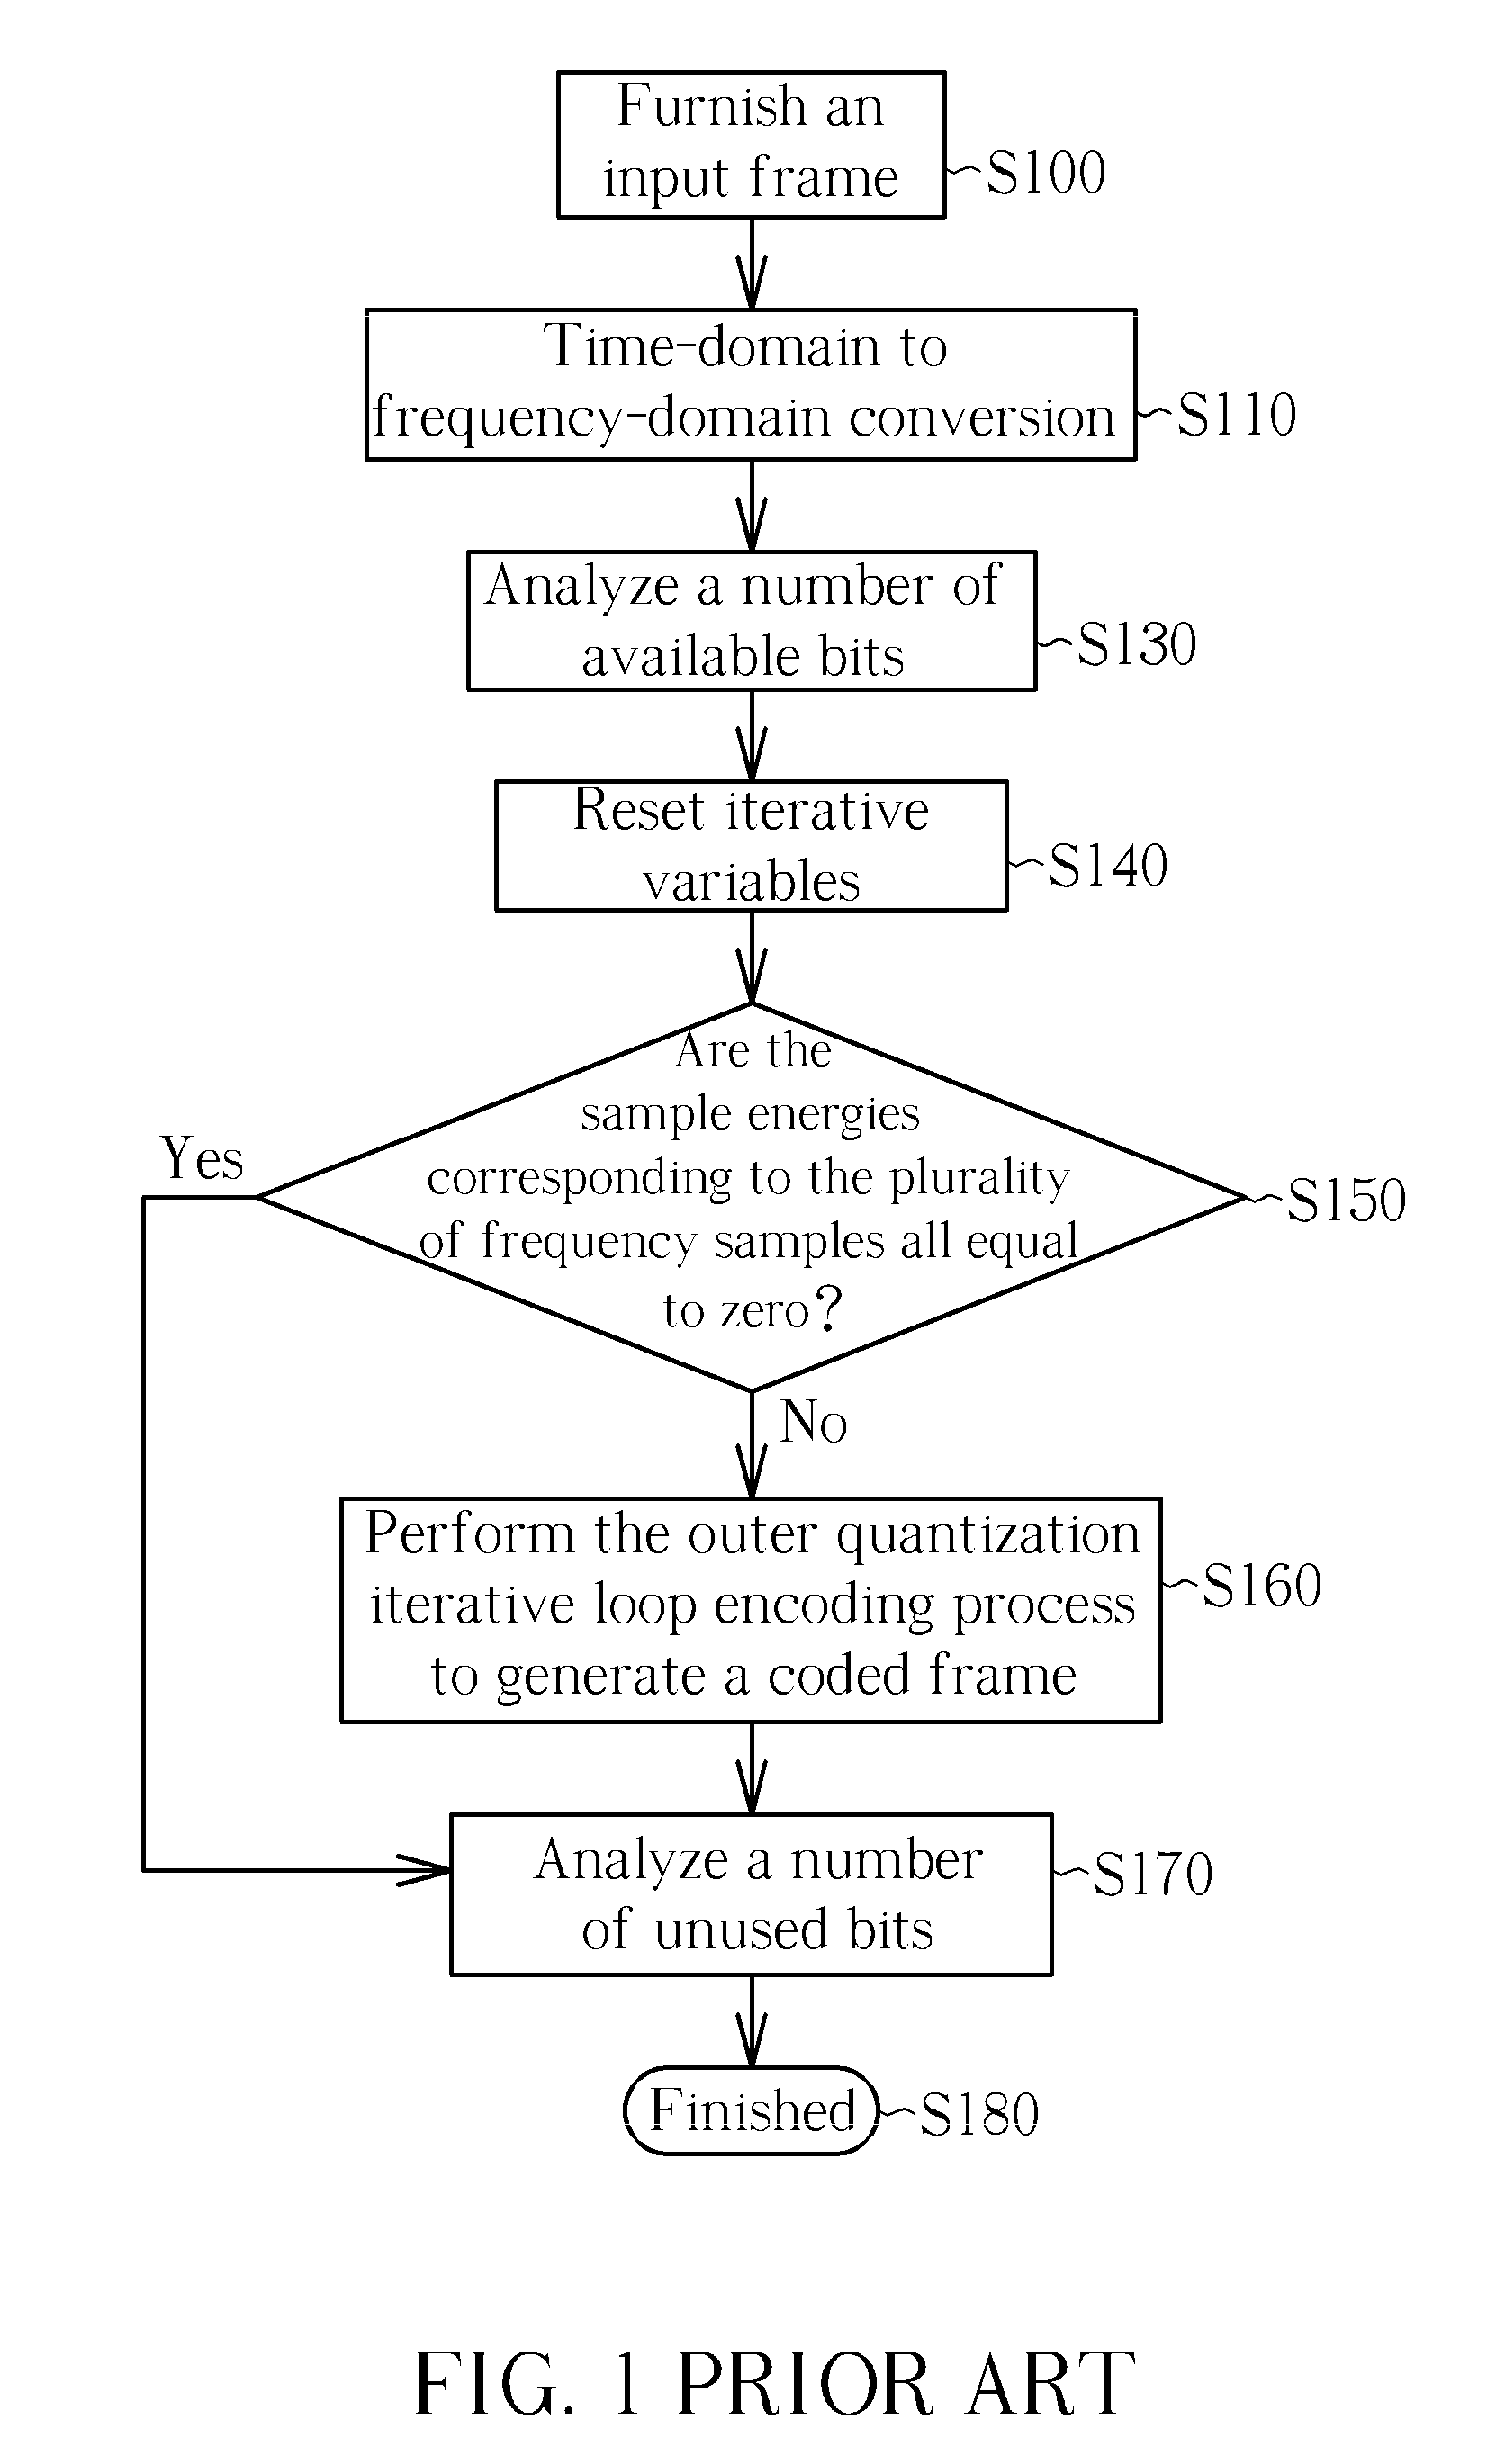 Audio encoding method with function of accelerating a quantization iterative loop process